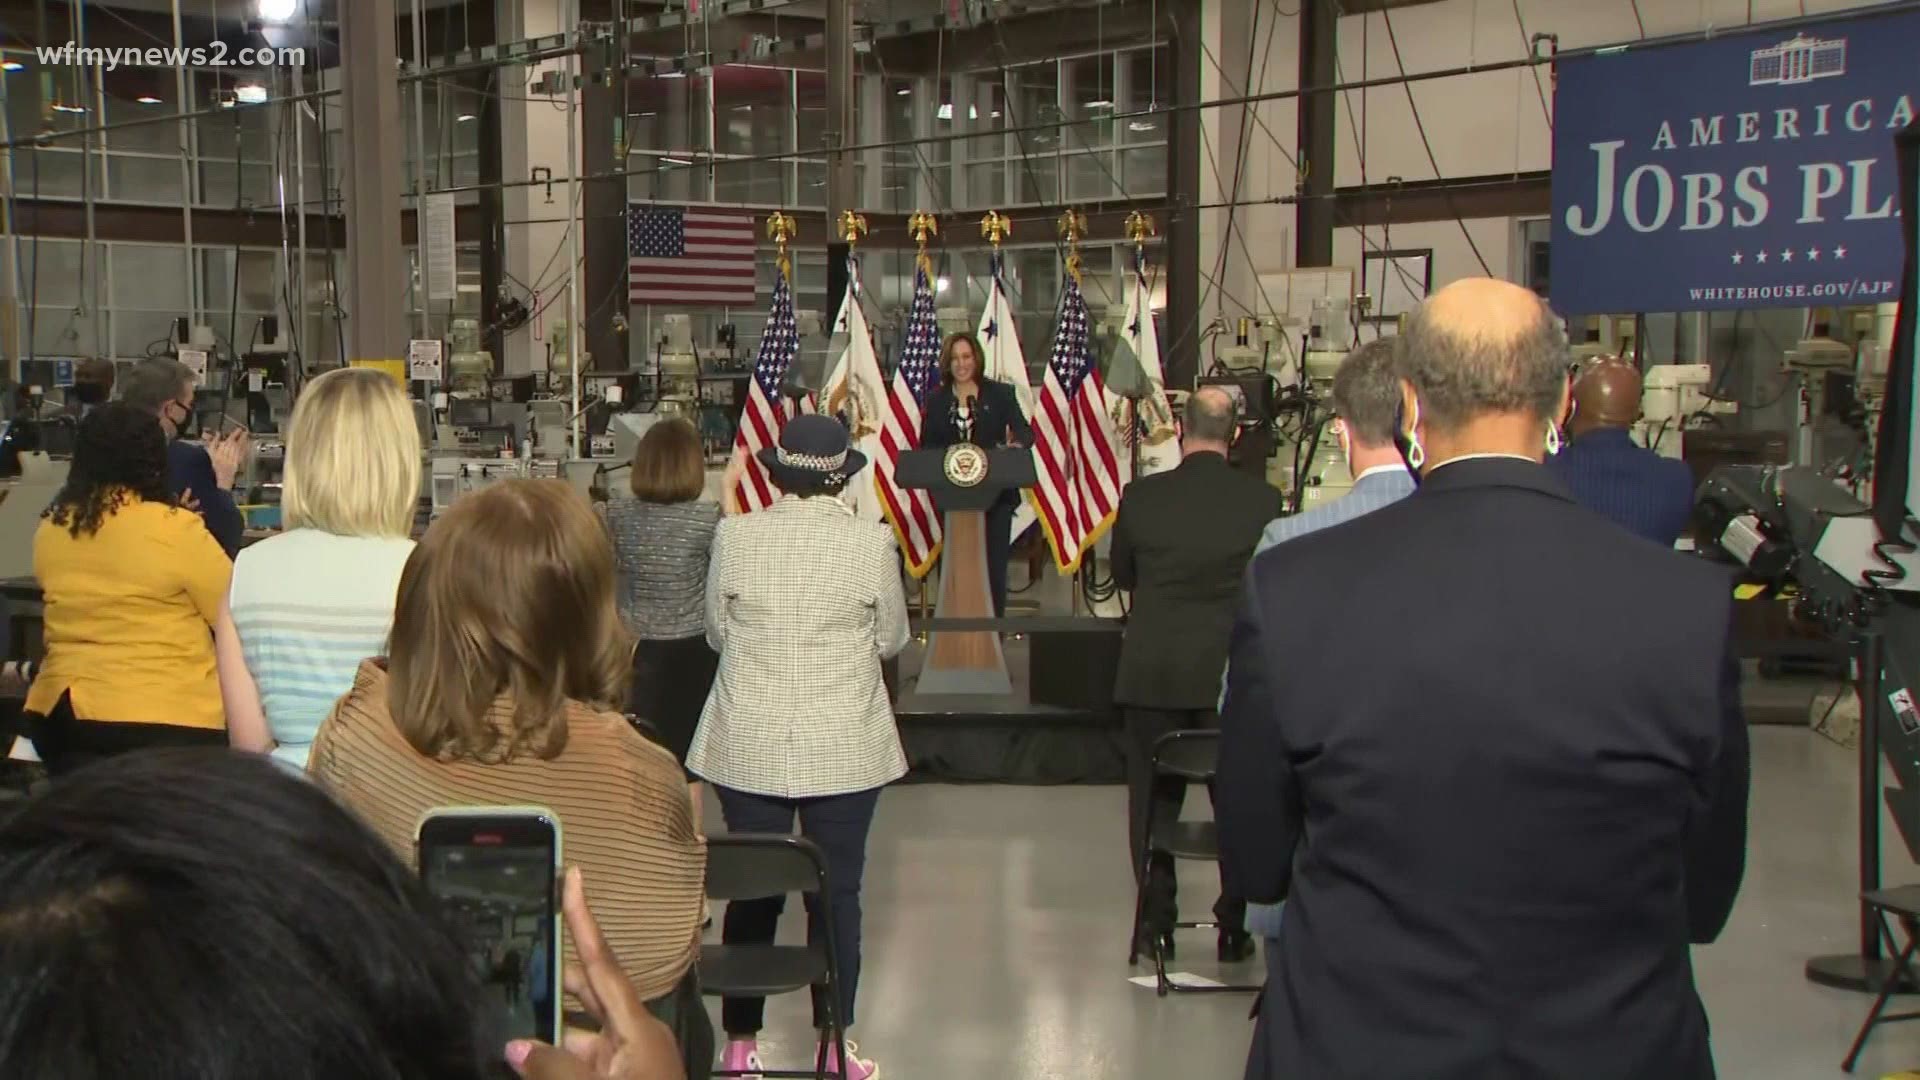 The vice president made stops in Greensboro and High Point to discuss President Biden’s American Jobs Plan.